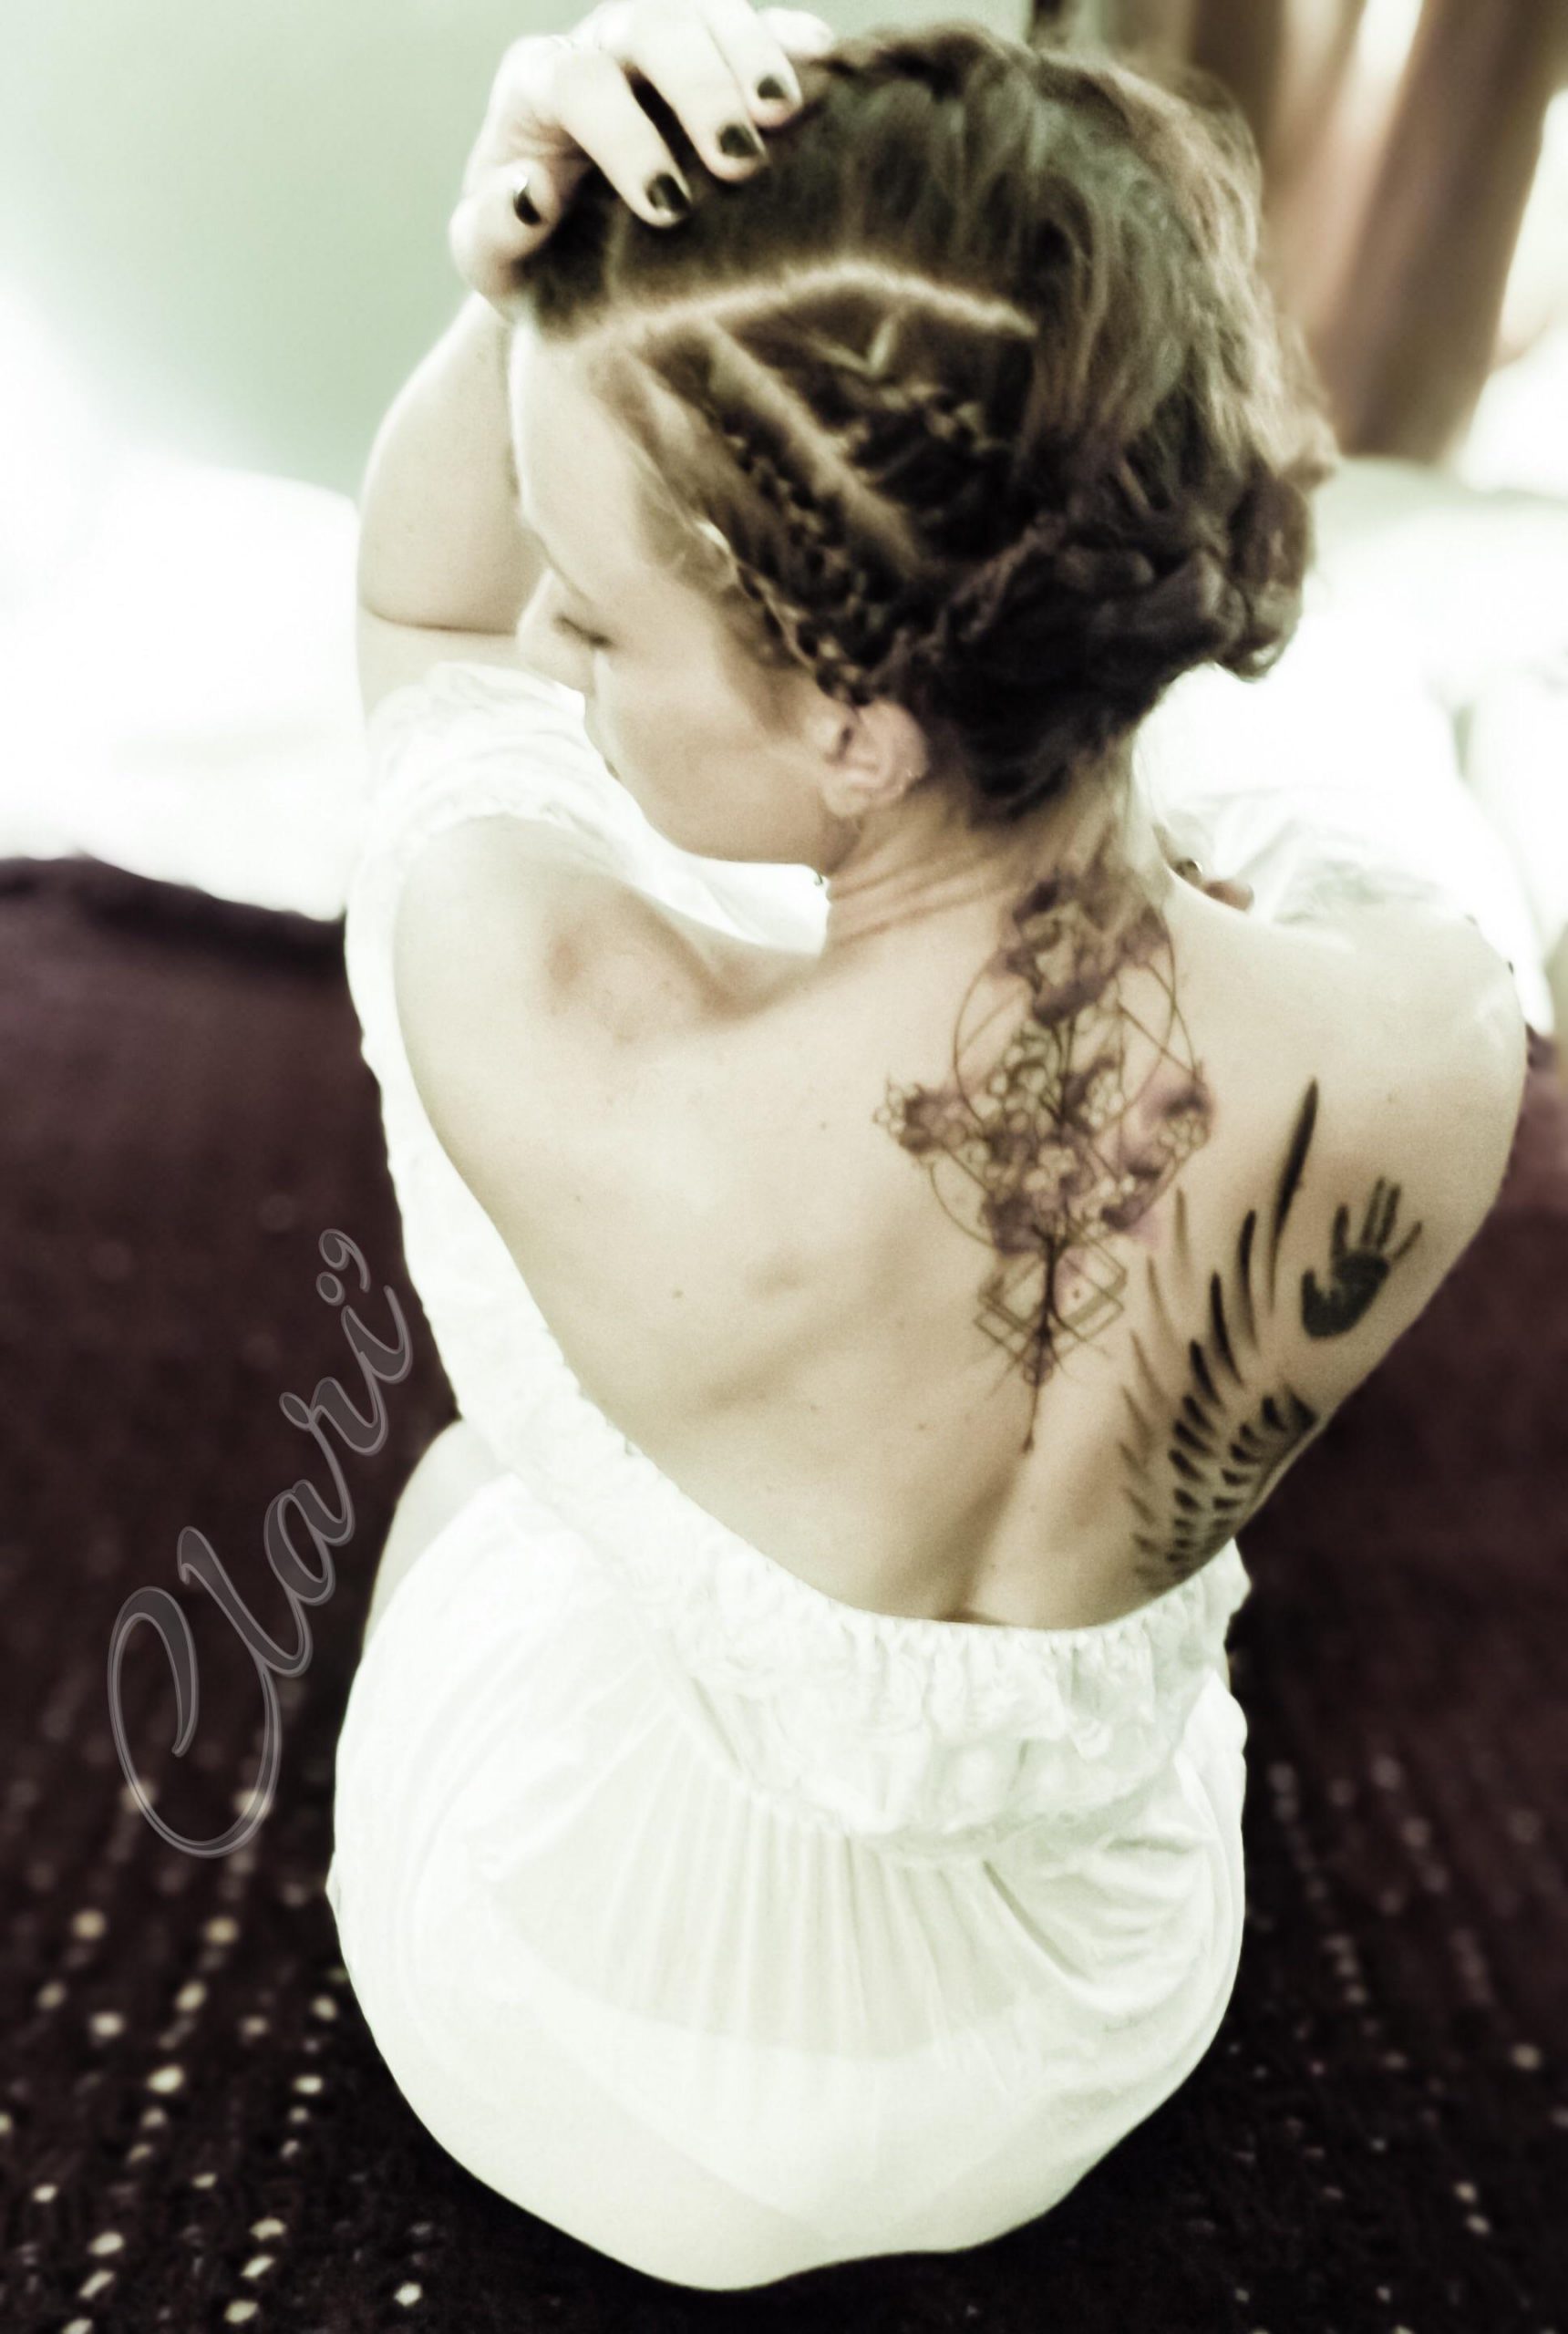 My Tattoos Tell My Story. Come See More Of Me On OF. Coming To MFC Soon!